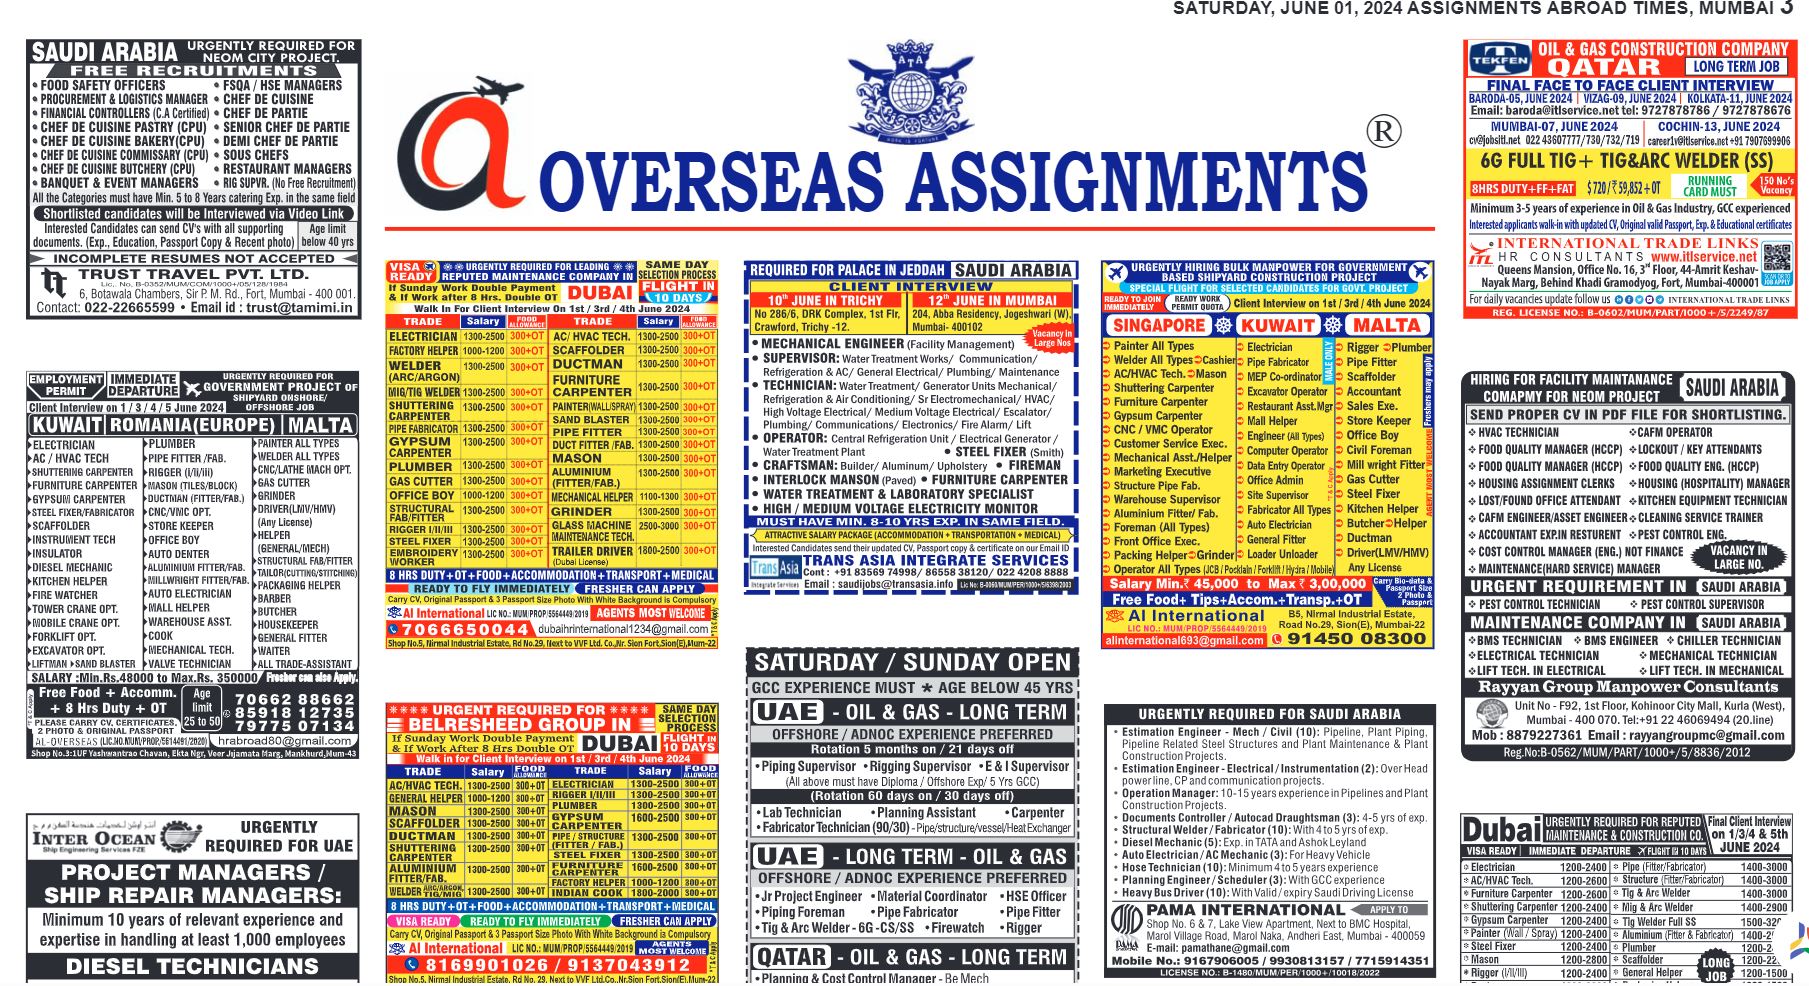 assignment abroad t